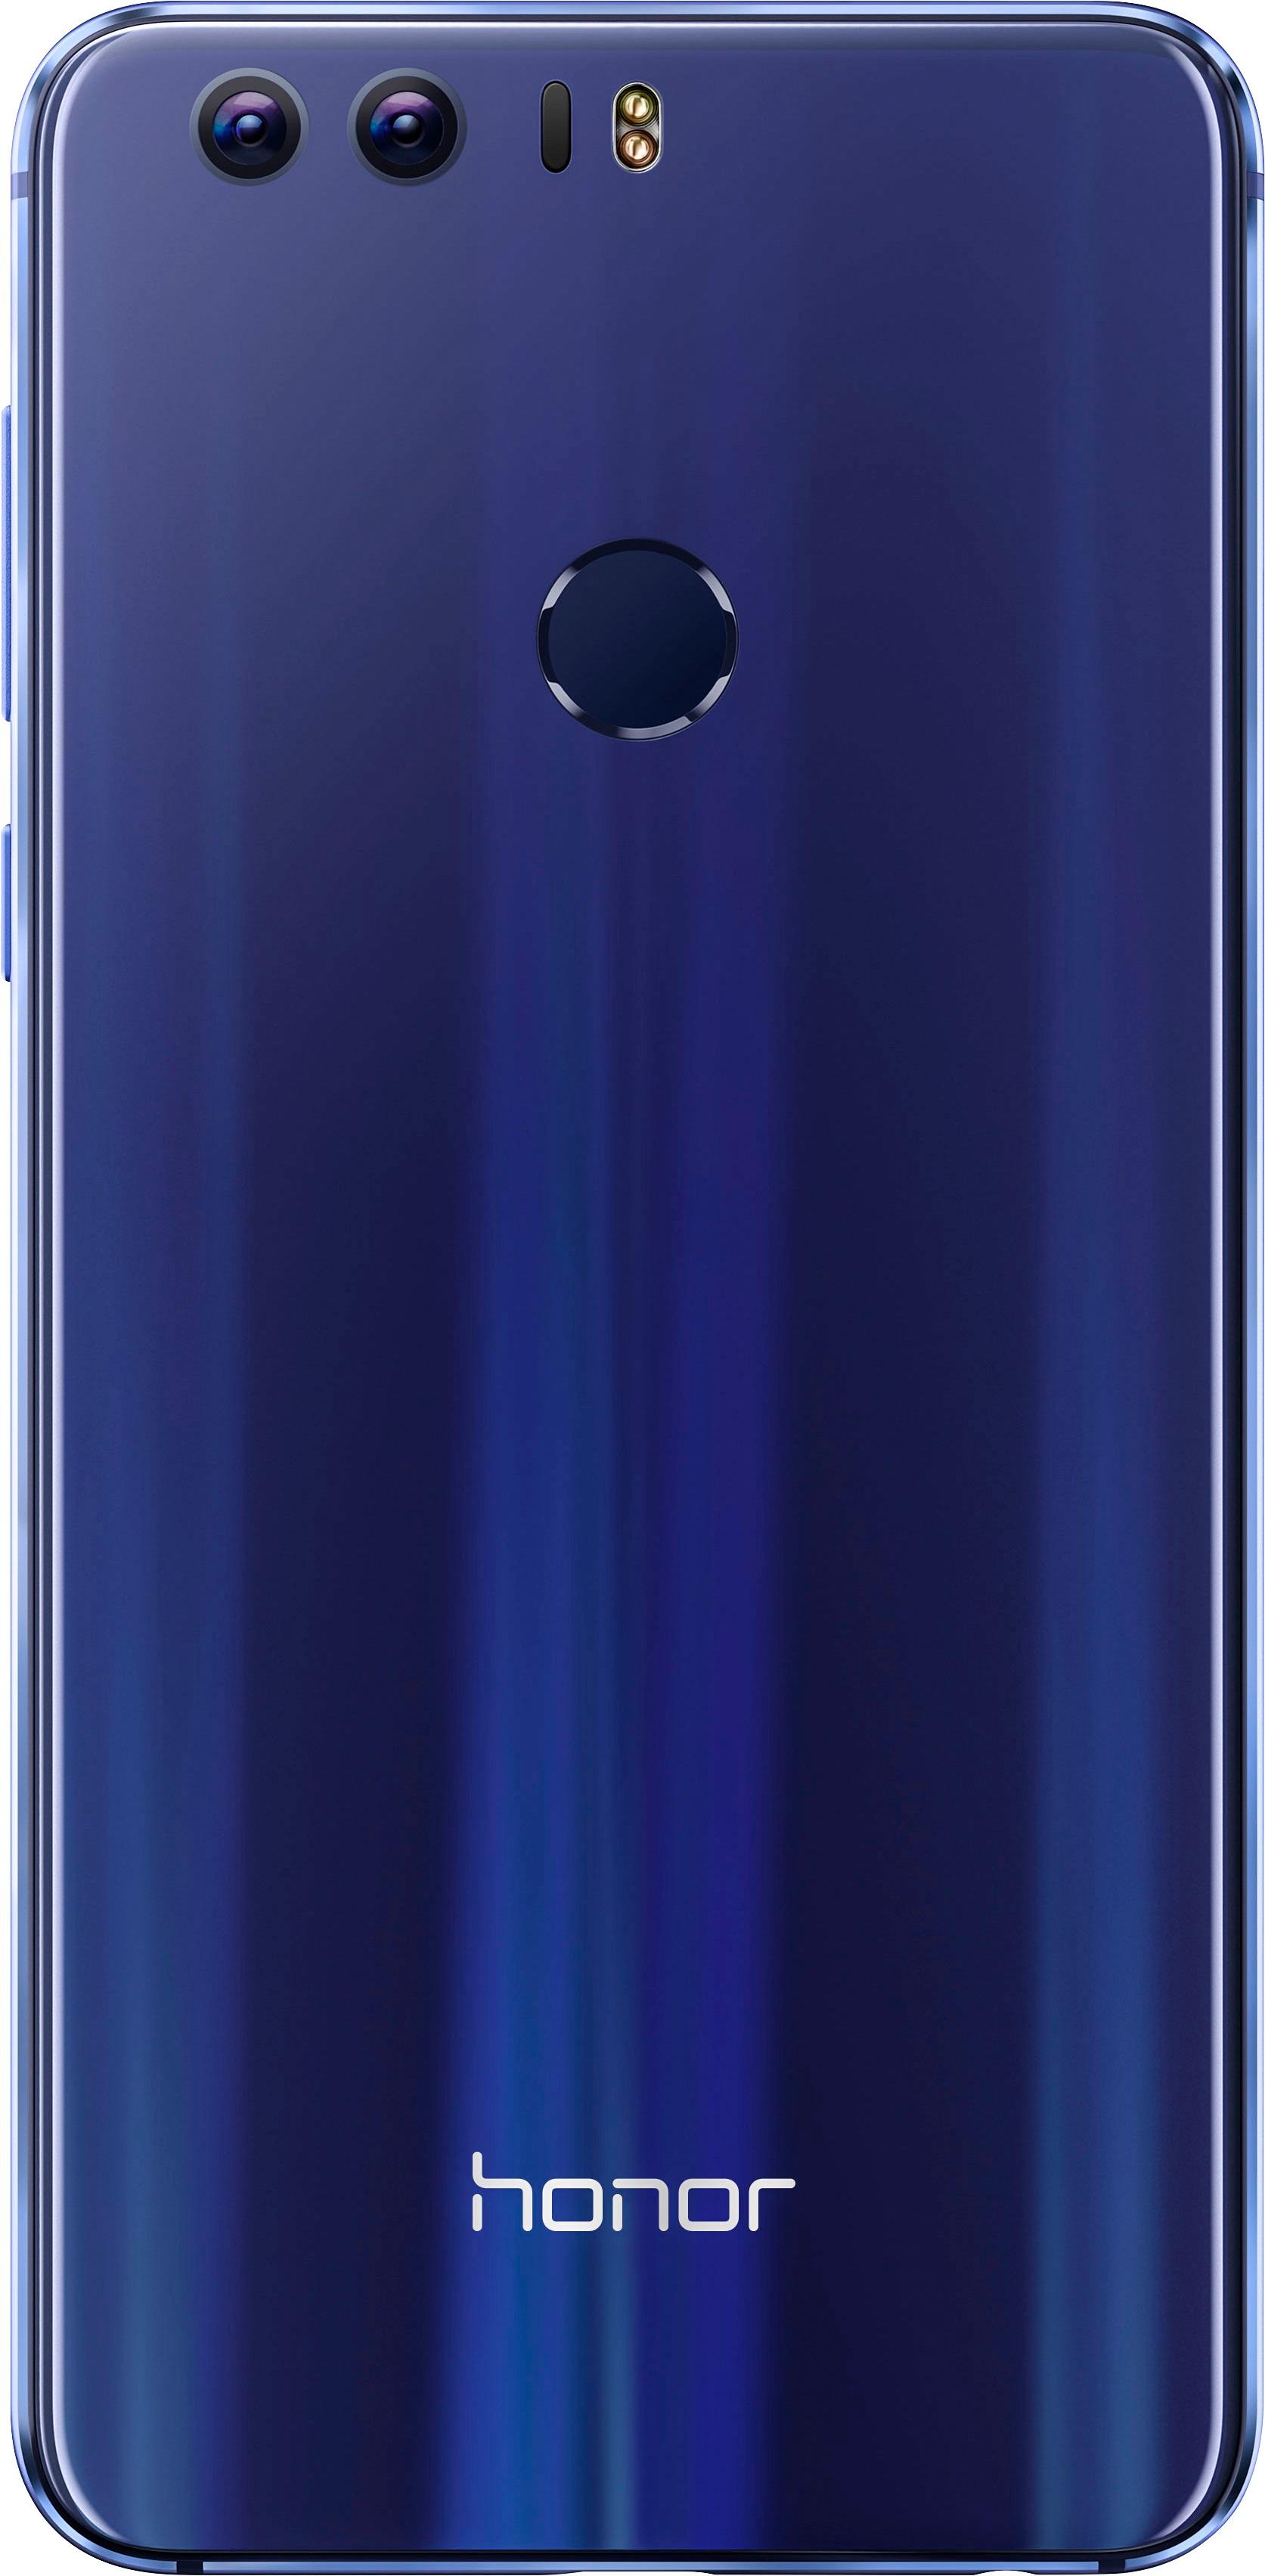 dier borst Darmen Best Buy: Huawei Honor 8 4G LTE with 64GB Memory Cell Phone (Unlocked)  Sapphire blue FRD-L14